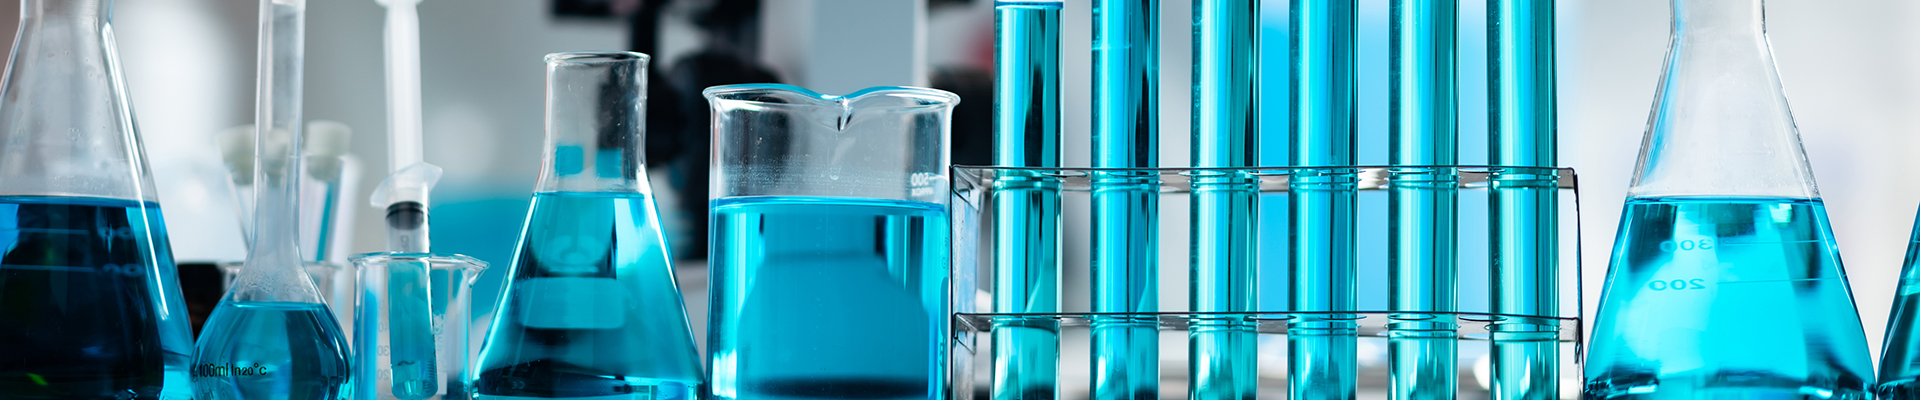 Various lab containers filed with blue liquid